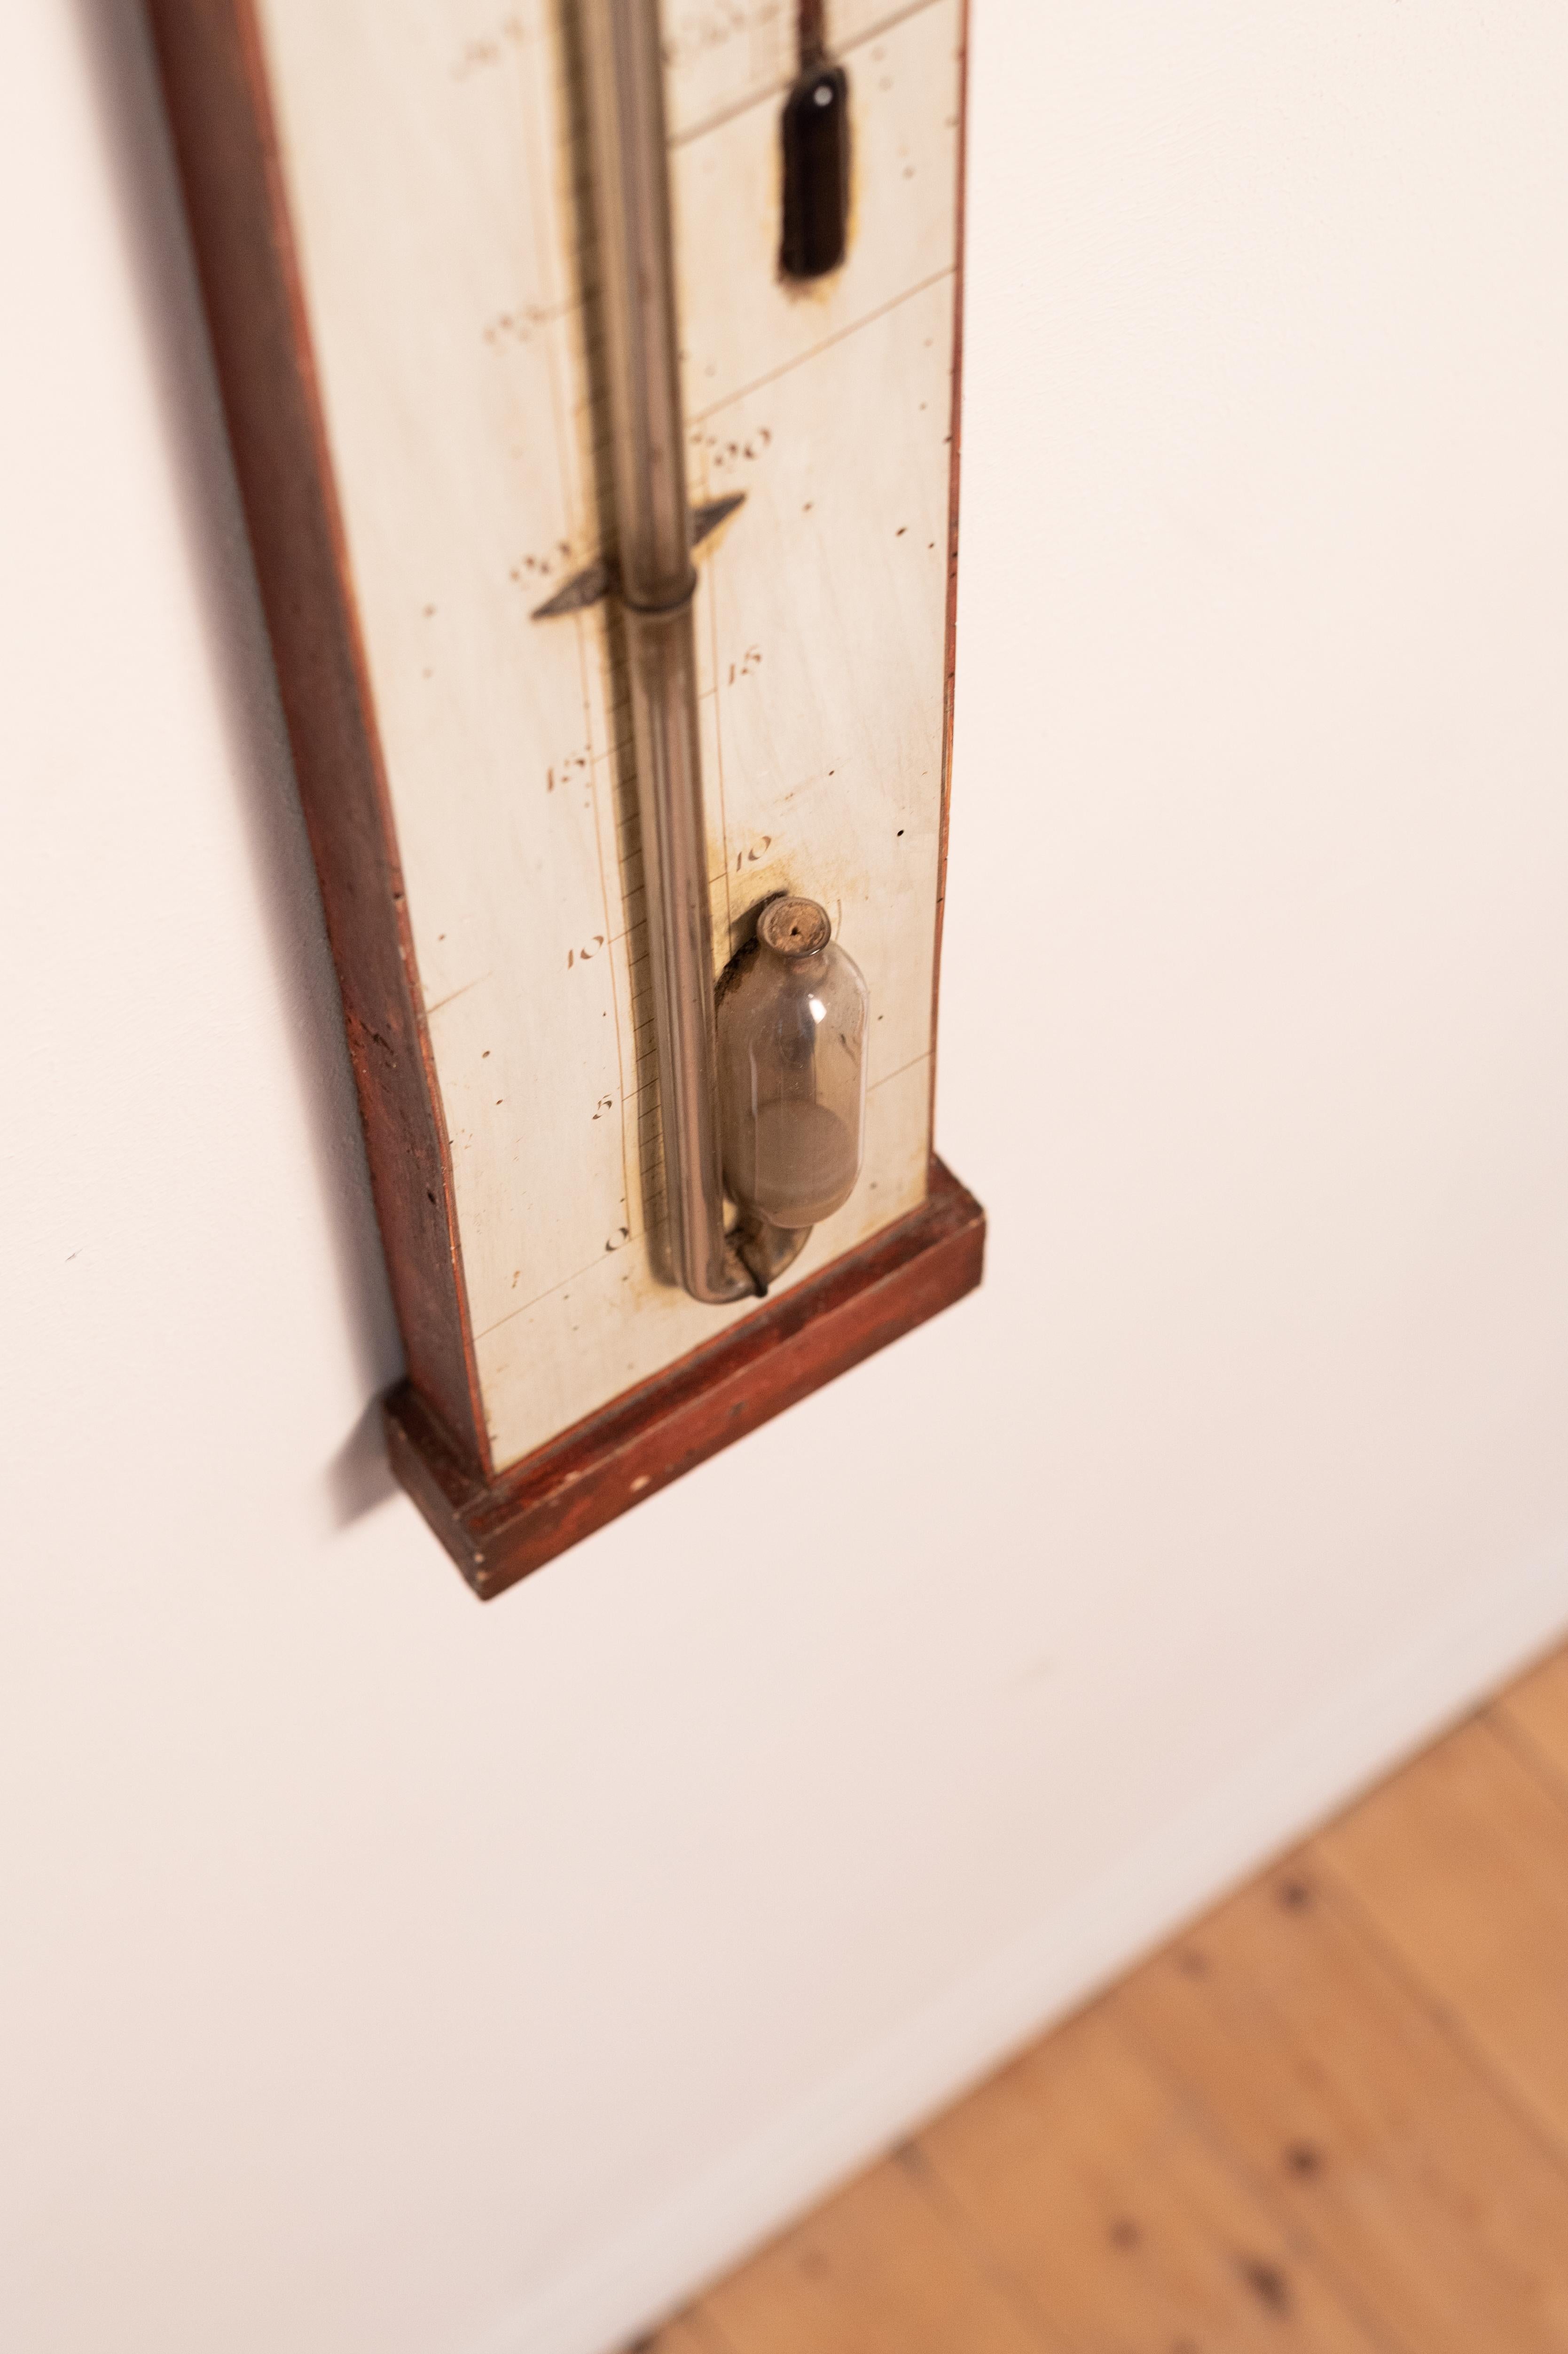 Hand-Painted 19th century hand-painted mercury thermometer/barometer, made by Bianchi  For Sale